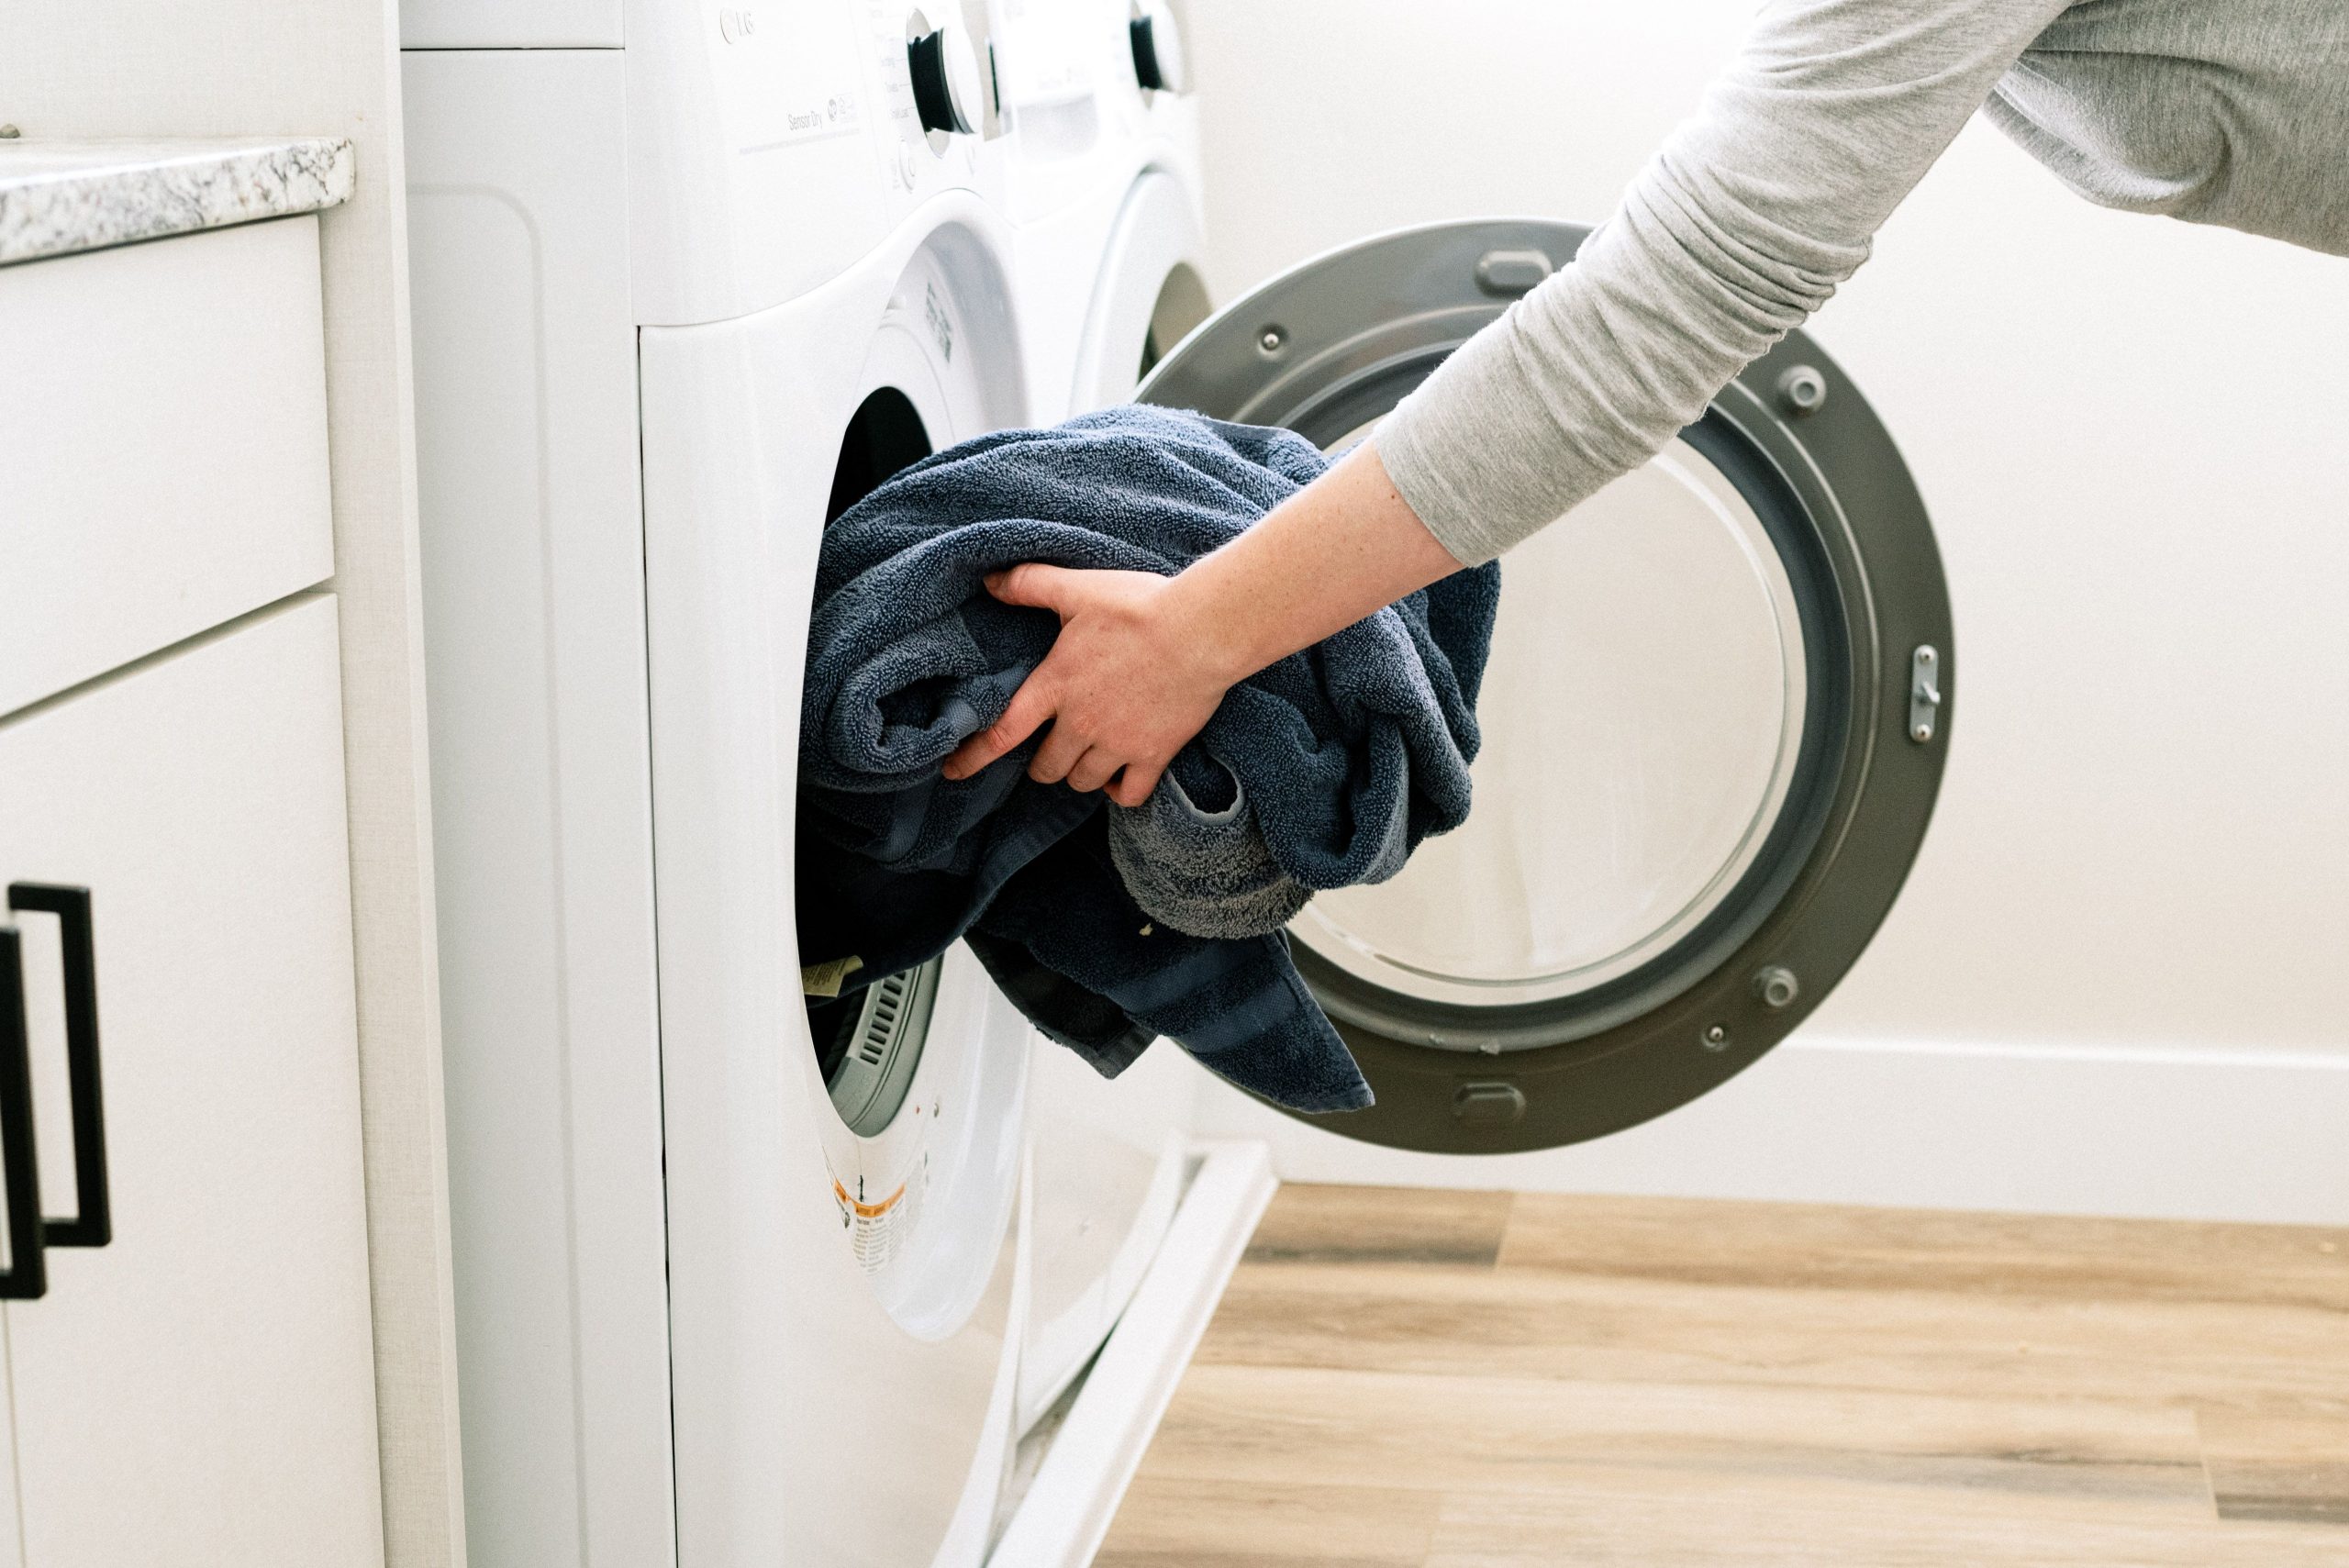 Tips for Drying Clothes in the Dryer